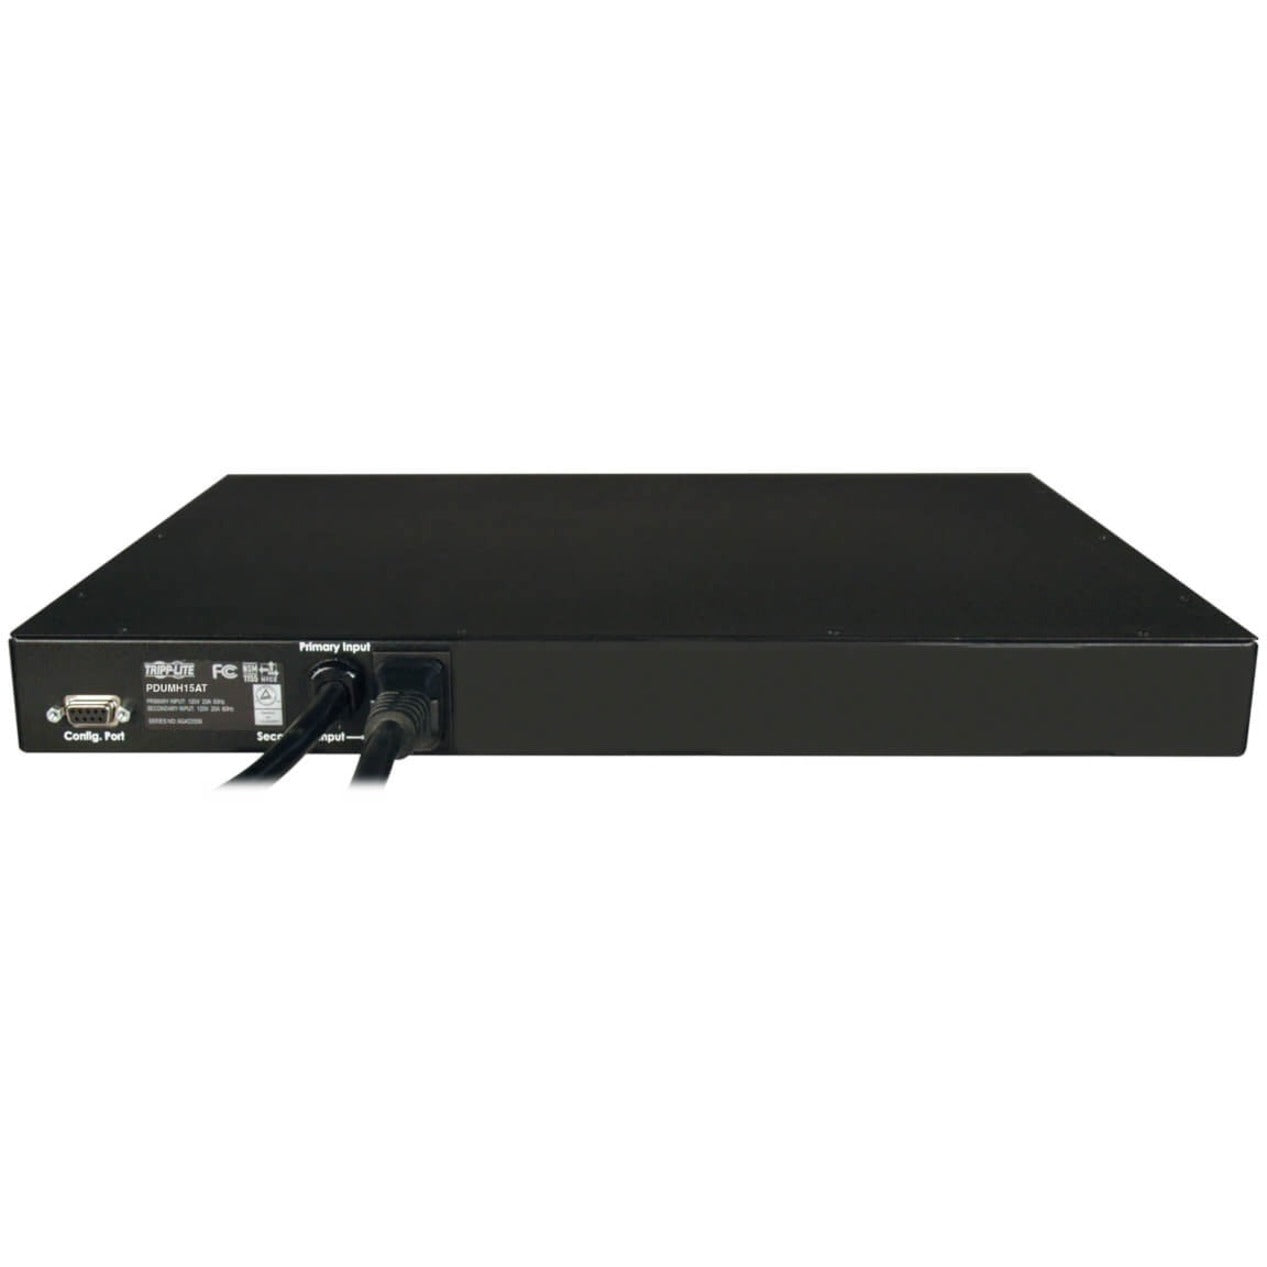 Tripp Lite PDUMH15AT PDU Metered ATS 120V 15A 8 Outlet Dual UPS Schutz Remote Outlet Control